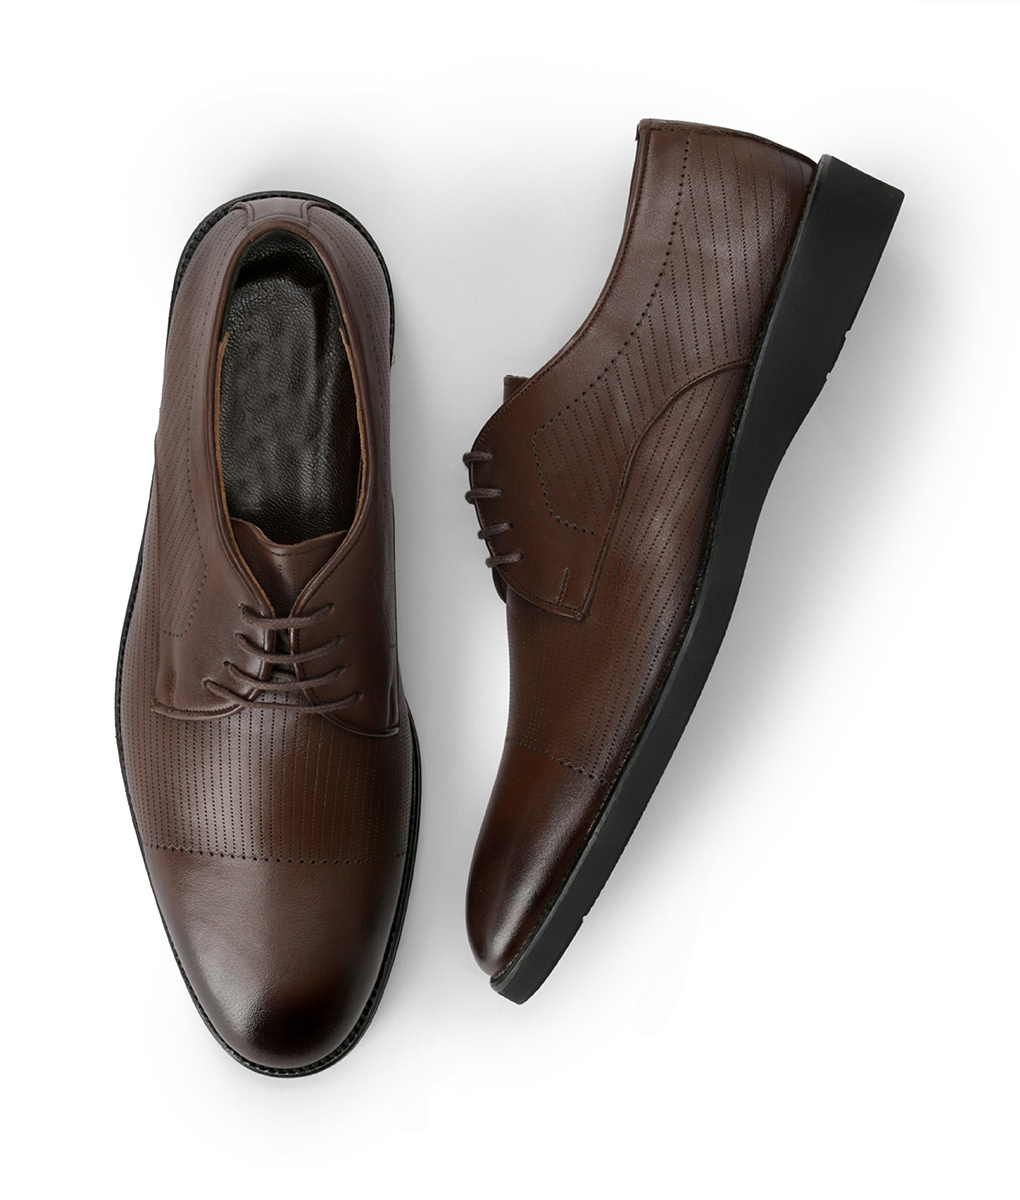 Men's Turkey Made Formal Brown Leather Shoes